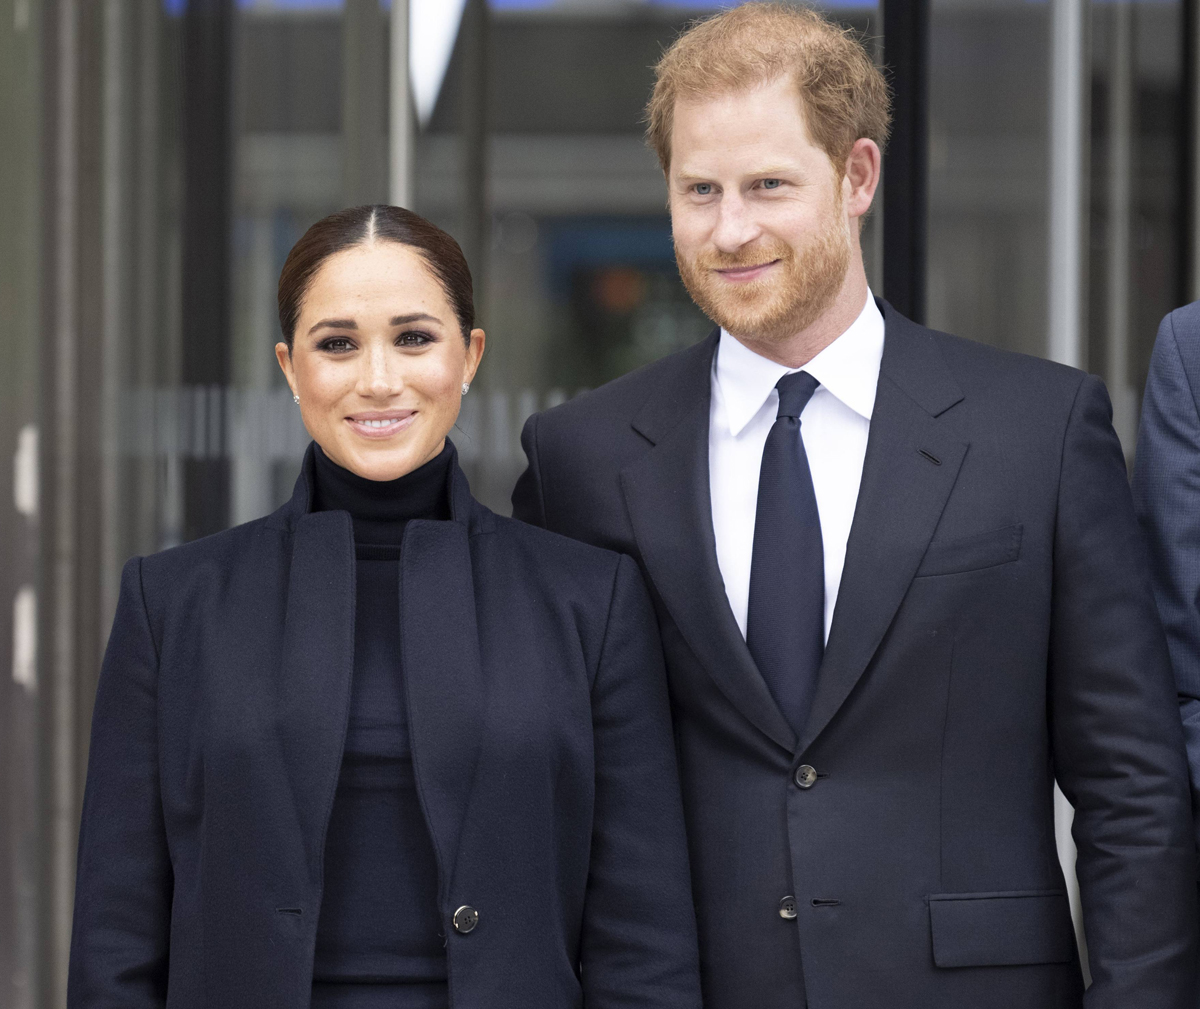 #Meghan Markle & Prince Harry Urge Everyone To Support Ukraine While Accepting NAACP President’s Award